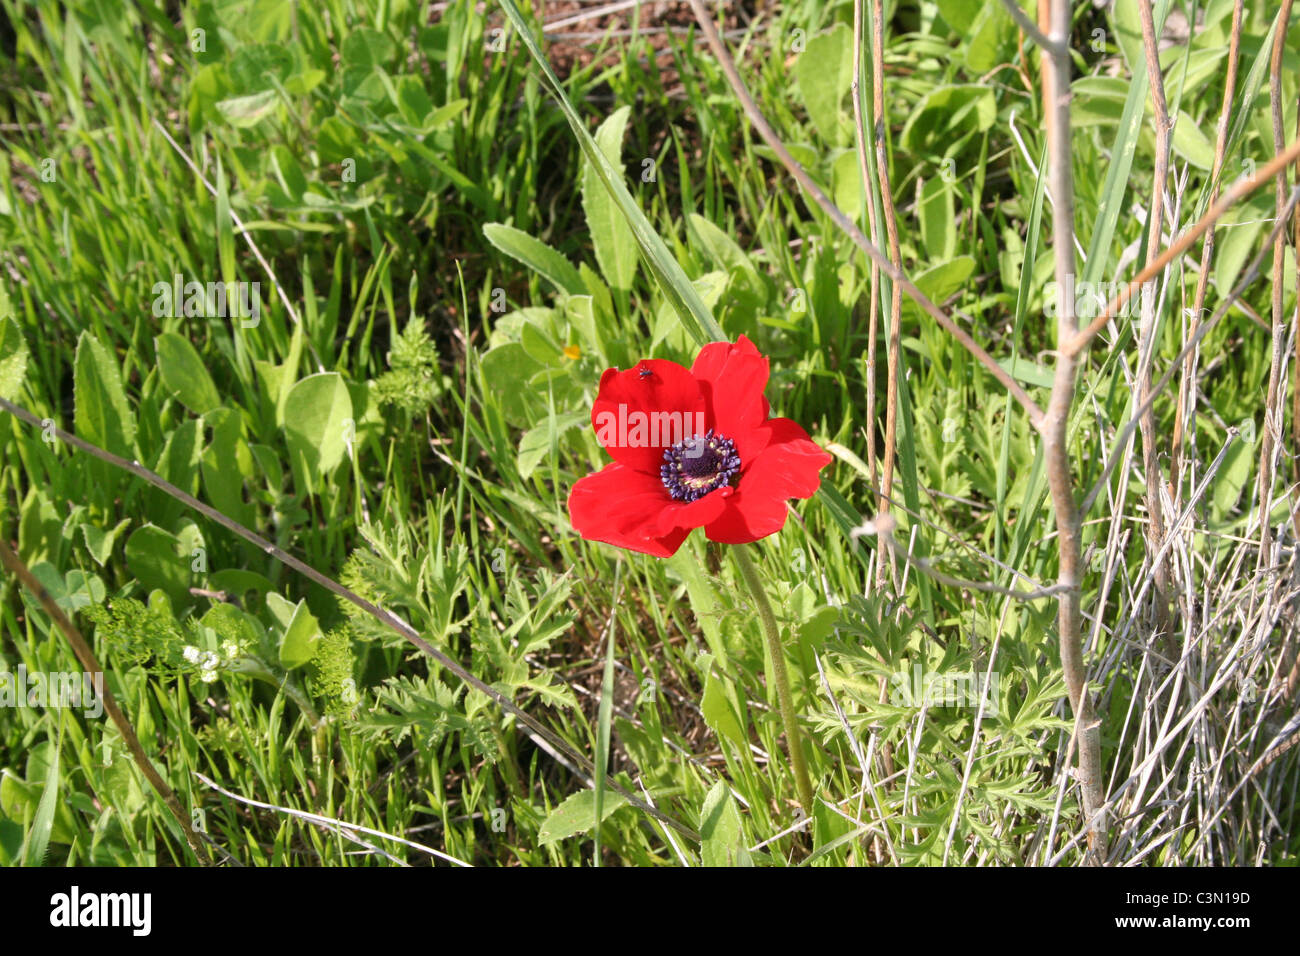 Red Crown Anemone in a green field Stock Photo